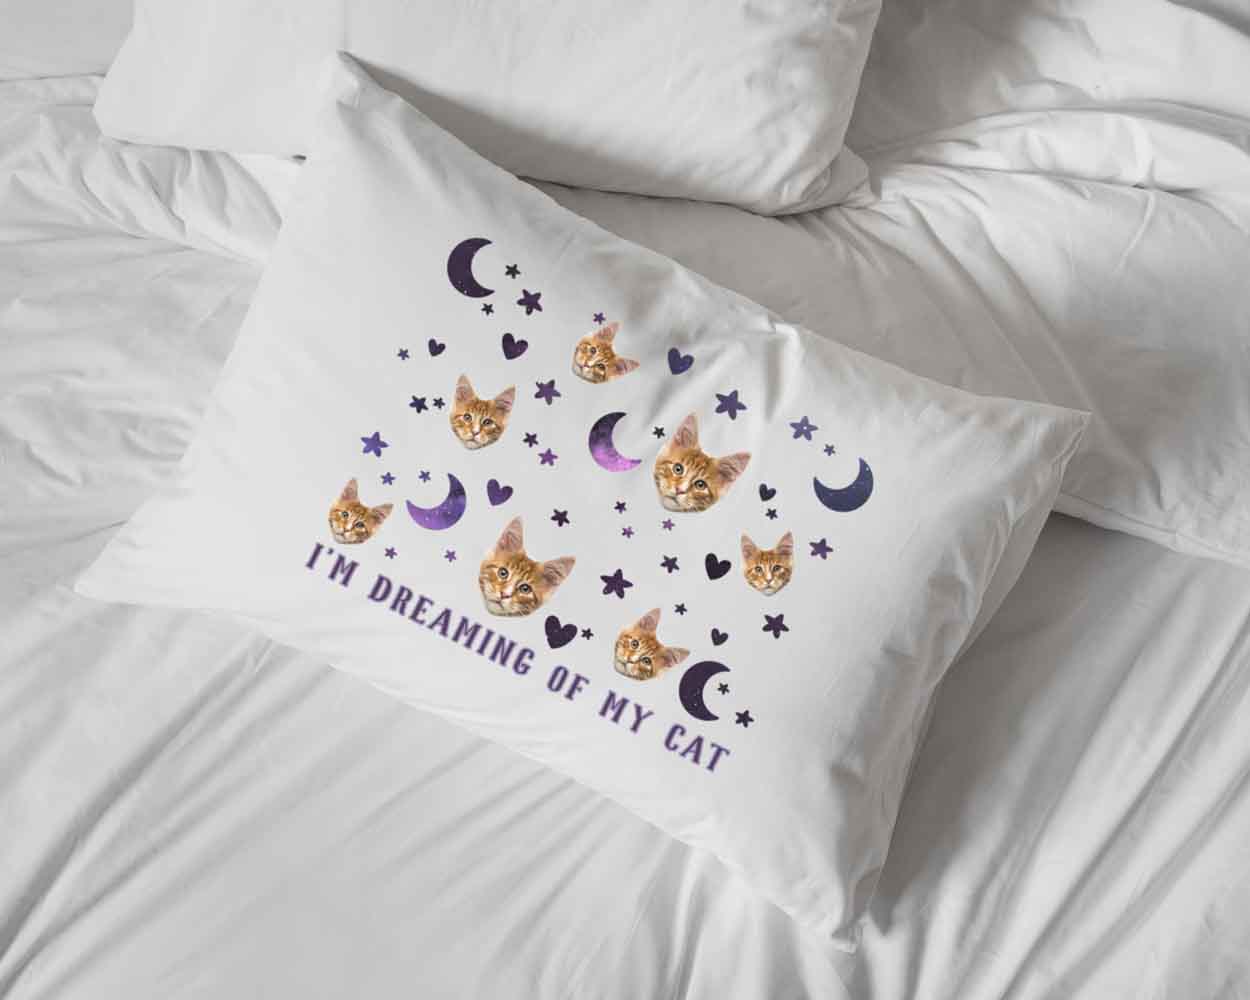 Custom printed pillowcase with your pets photo face cropped into I'm dreaming of my cat design custom digitally printed on standard pillowcase.